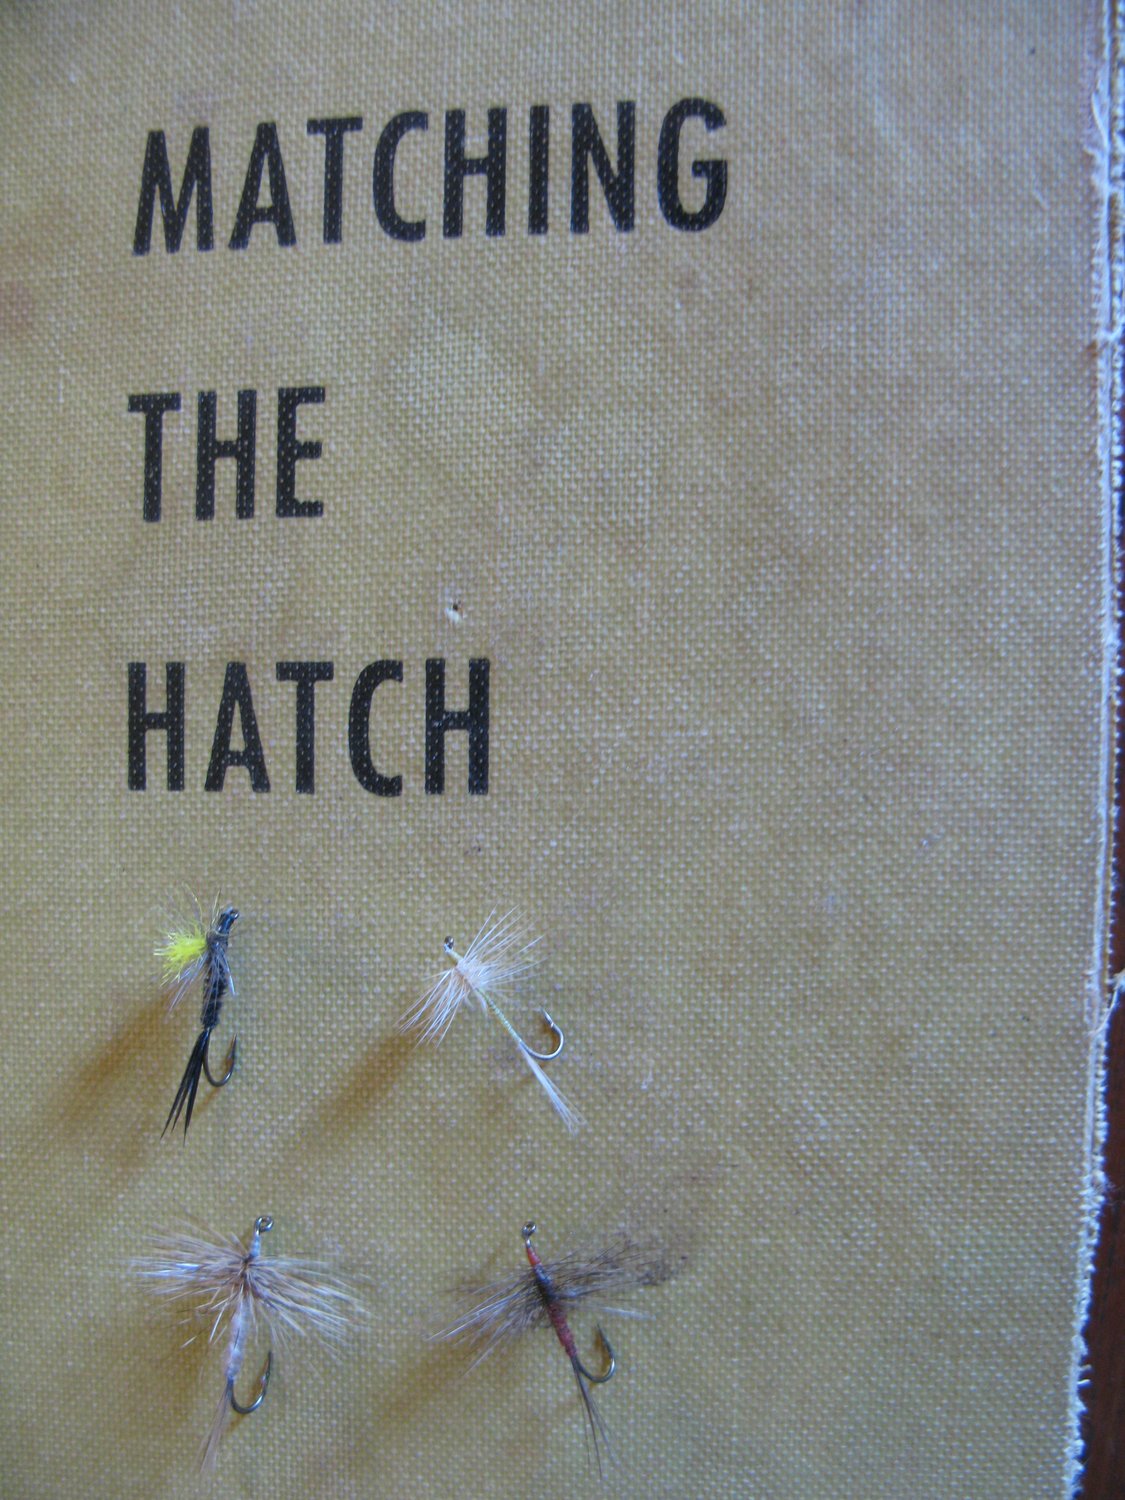 The author's old copy of "Matching The Hatch," with the spinners and parachute flies he will fish in the future.